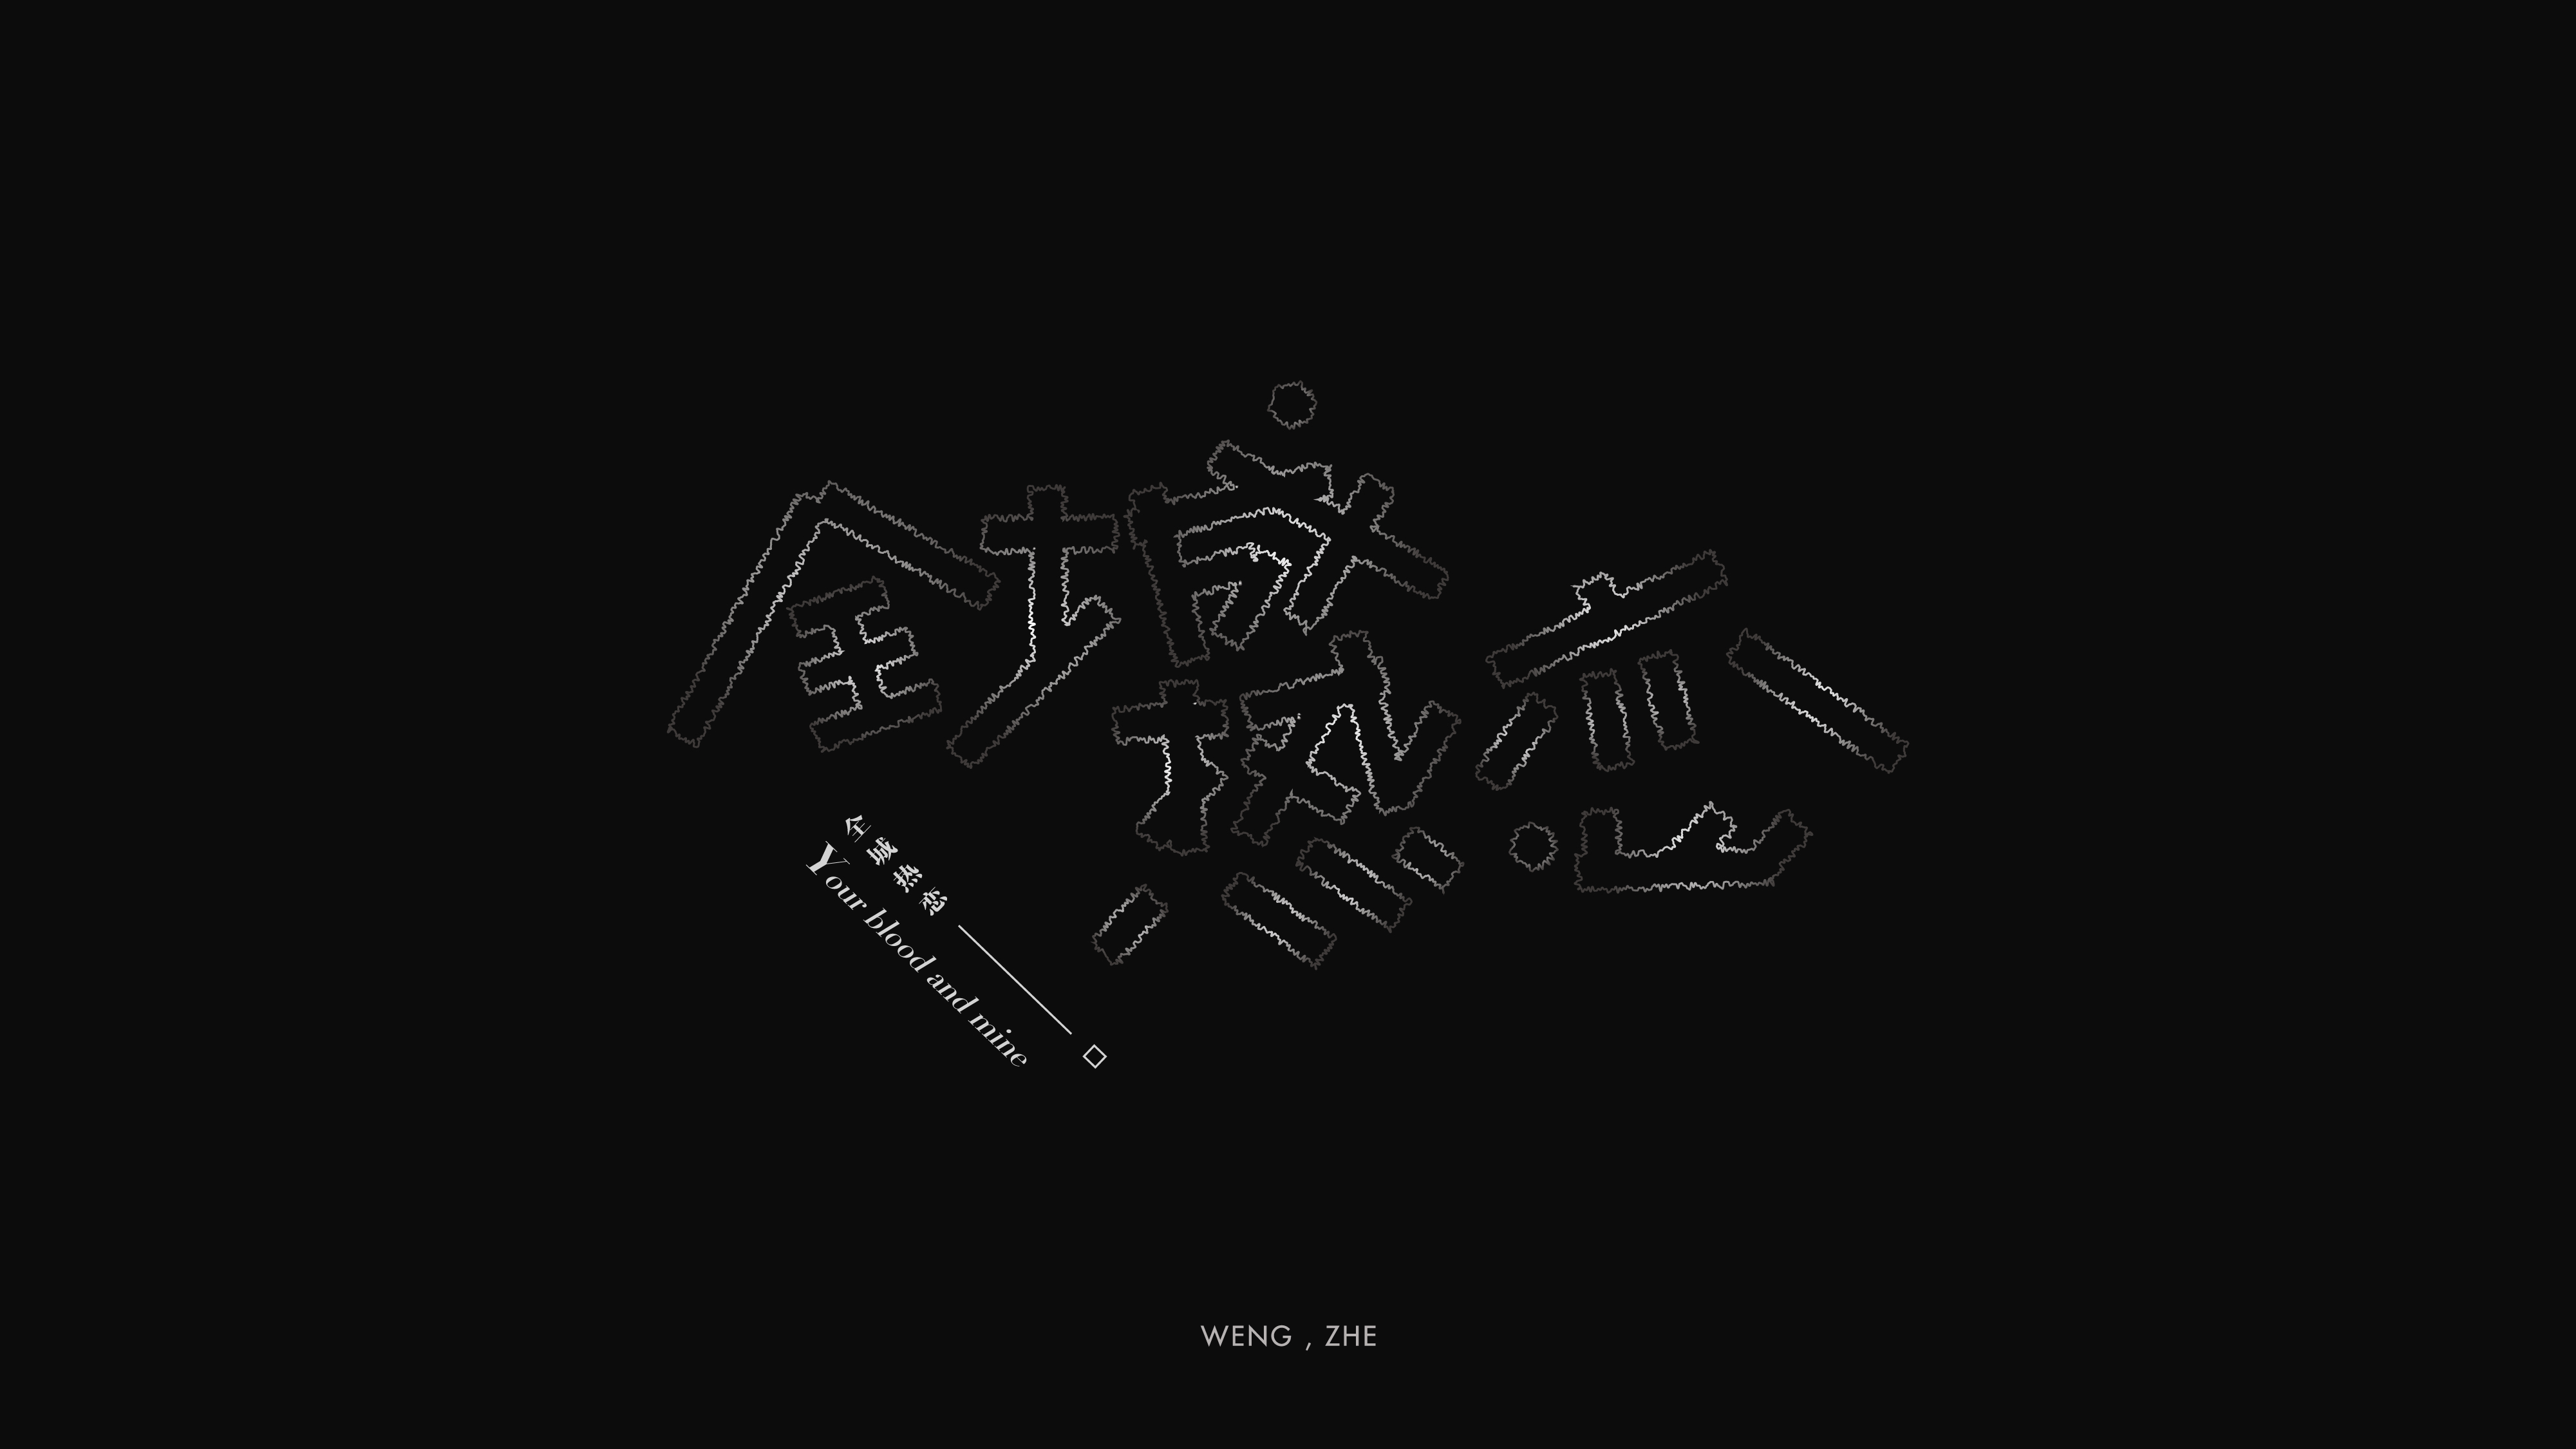 Interesting Chinese Creative Font Design-Some inspirational statements